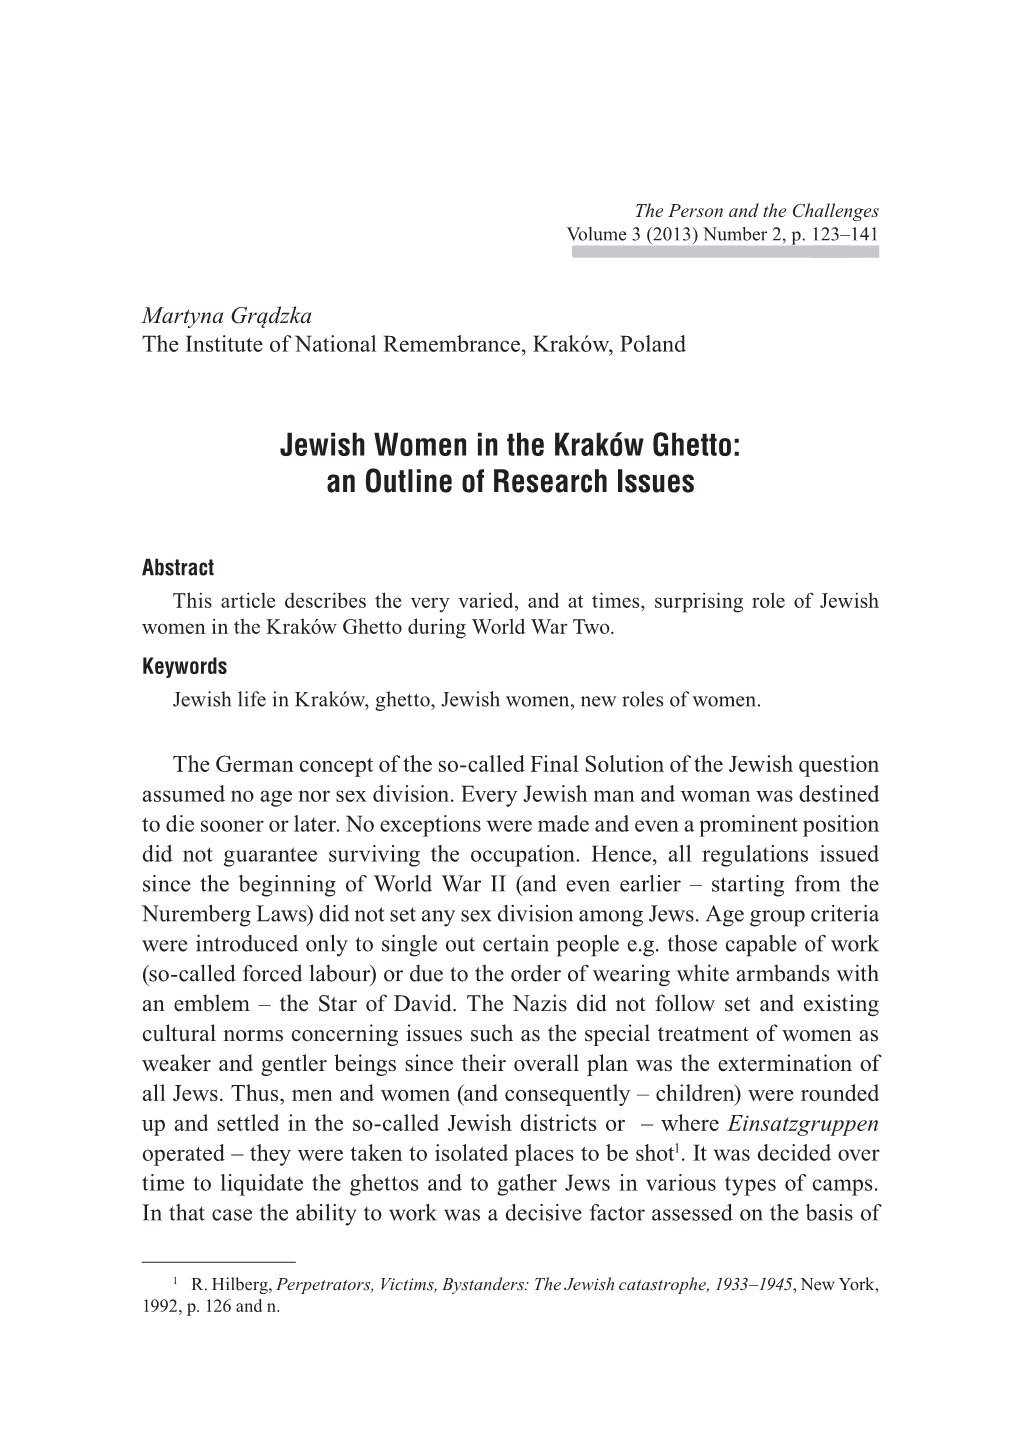 Jewish Women in the Kraków Ghetto: an Outline of Research Issues